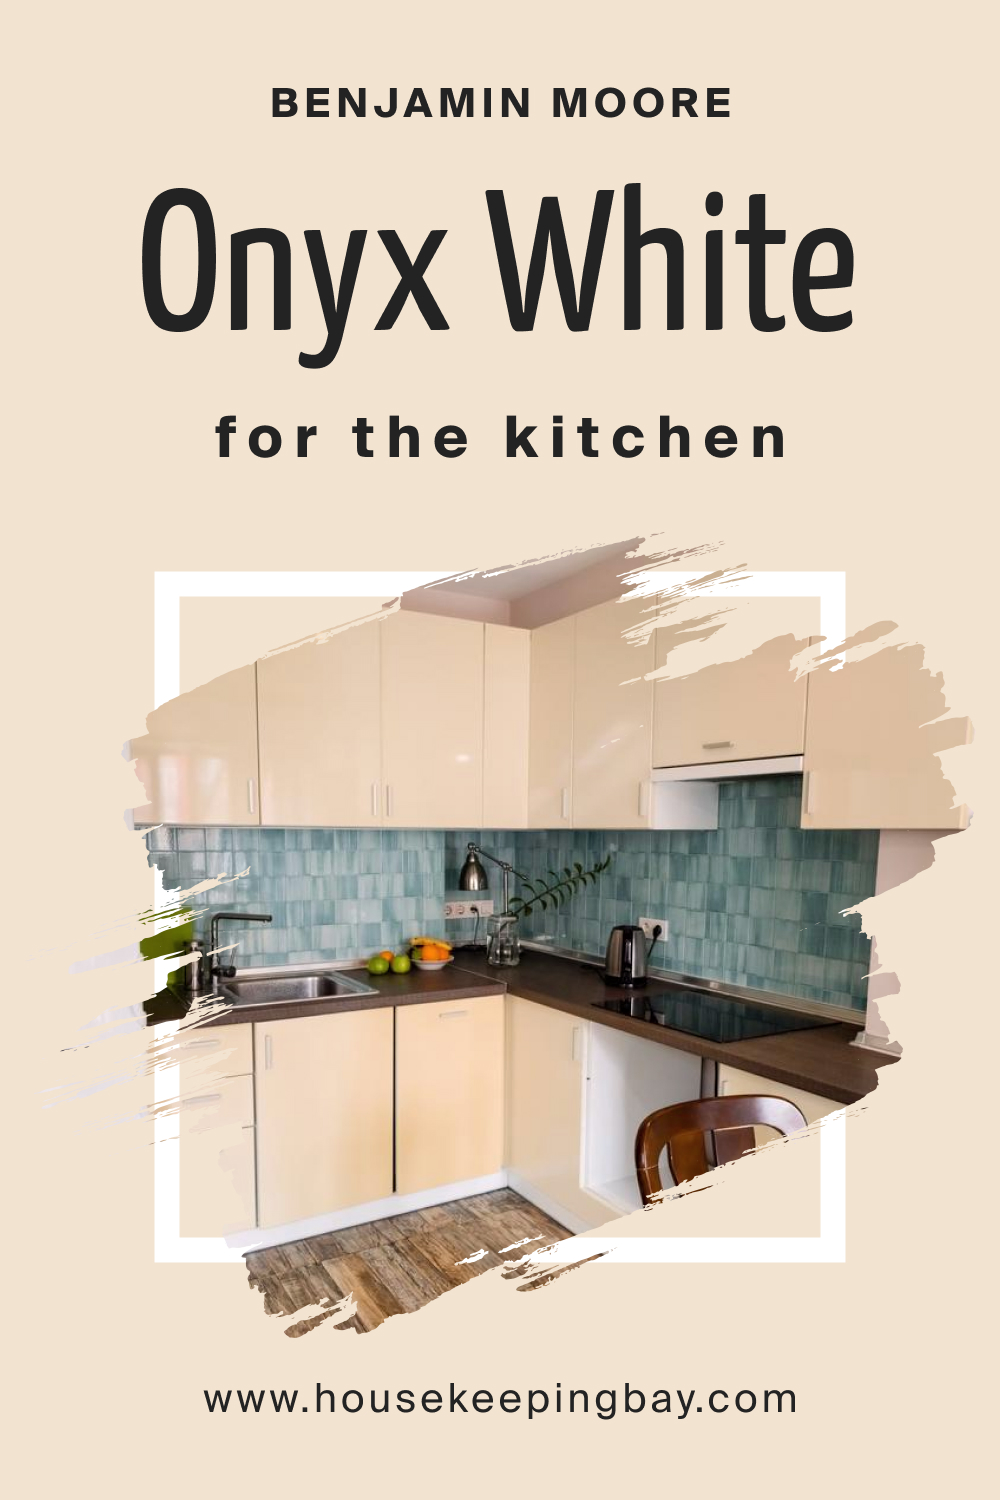 Benjamin Moore. Onyx White OC 74 for the Kitchen